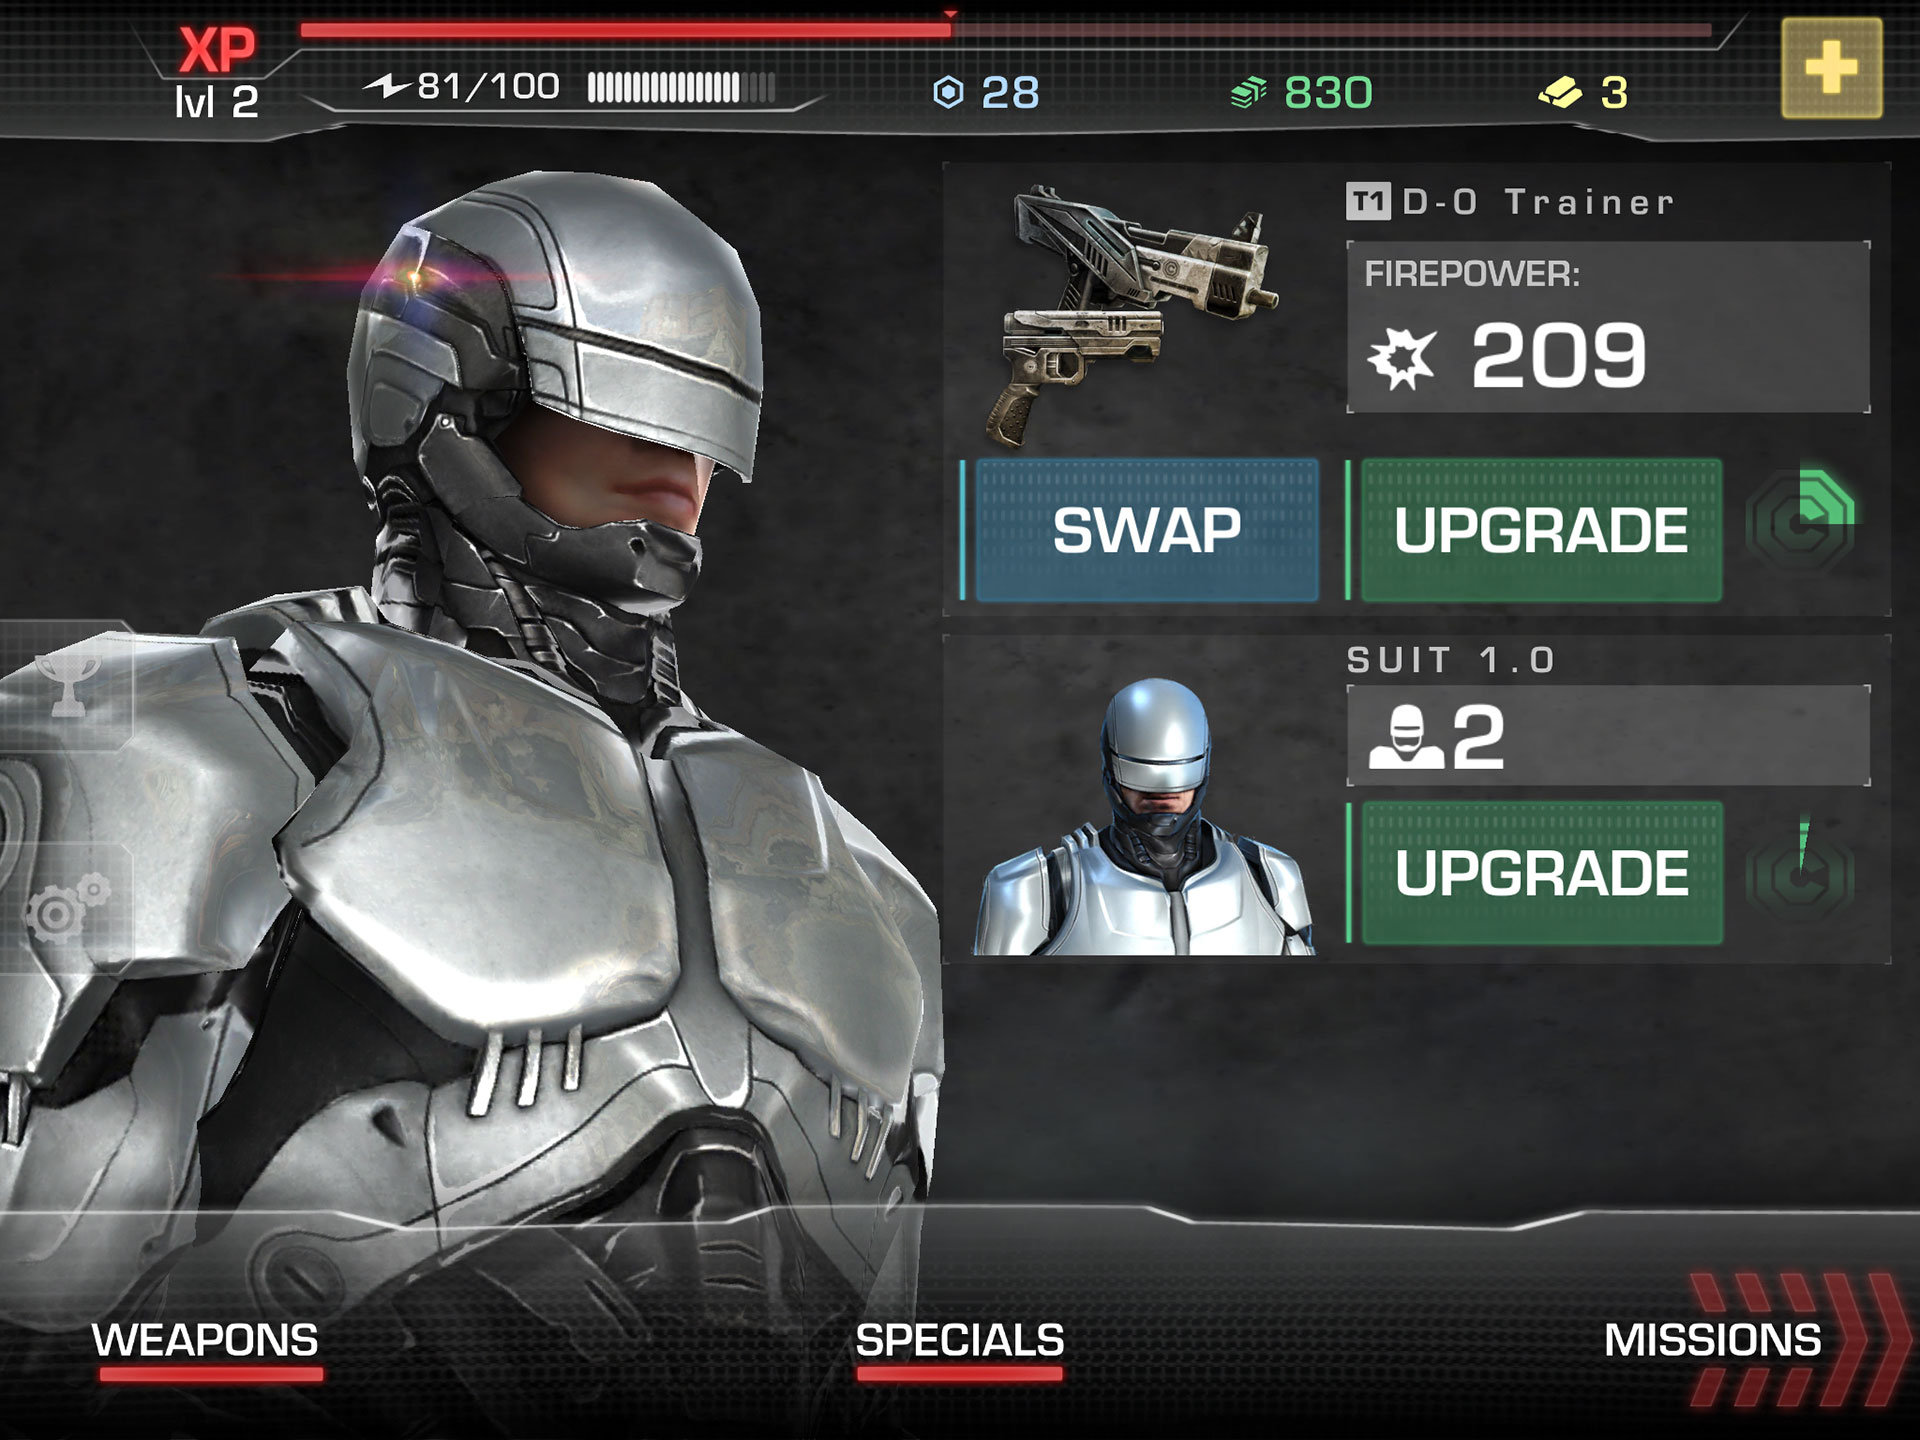 App Review: They Made A RoboCop Game Out Of Deer Hunter, And It’s Not Bad